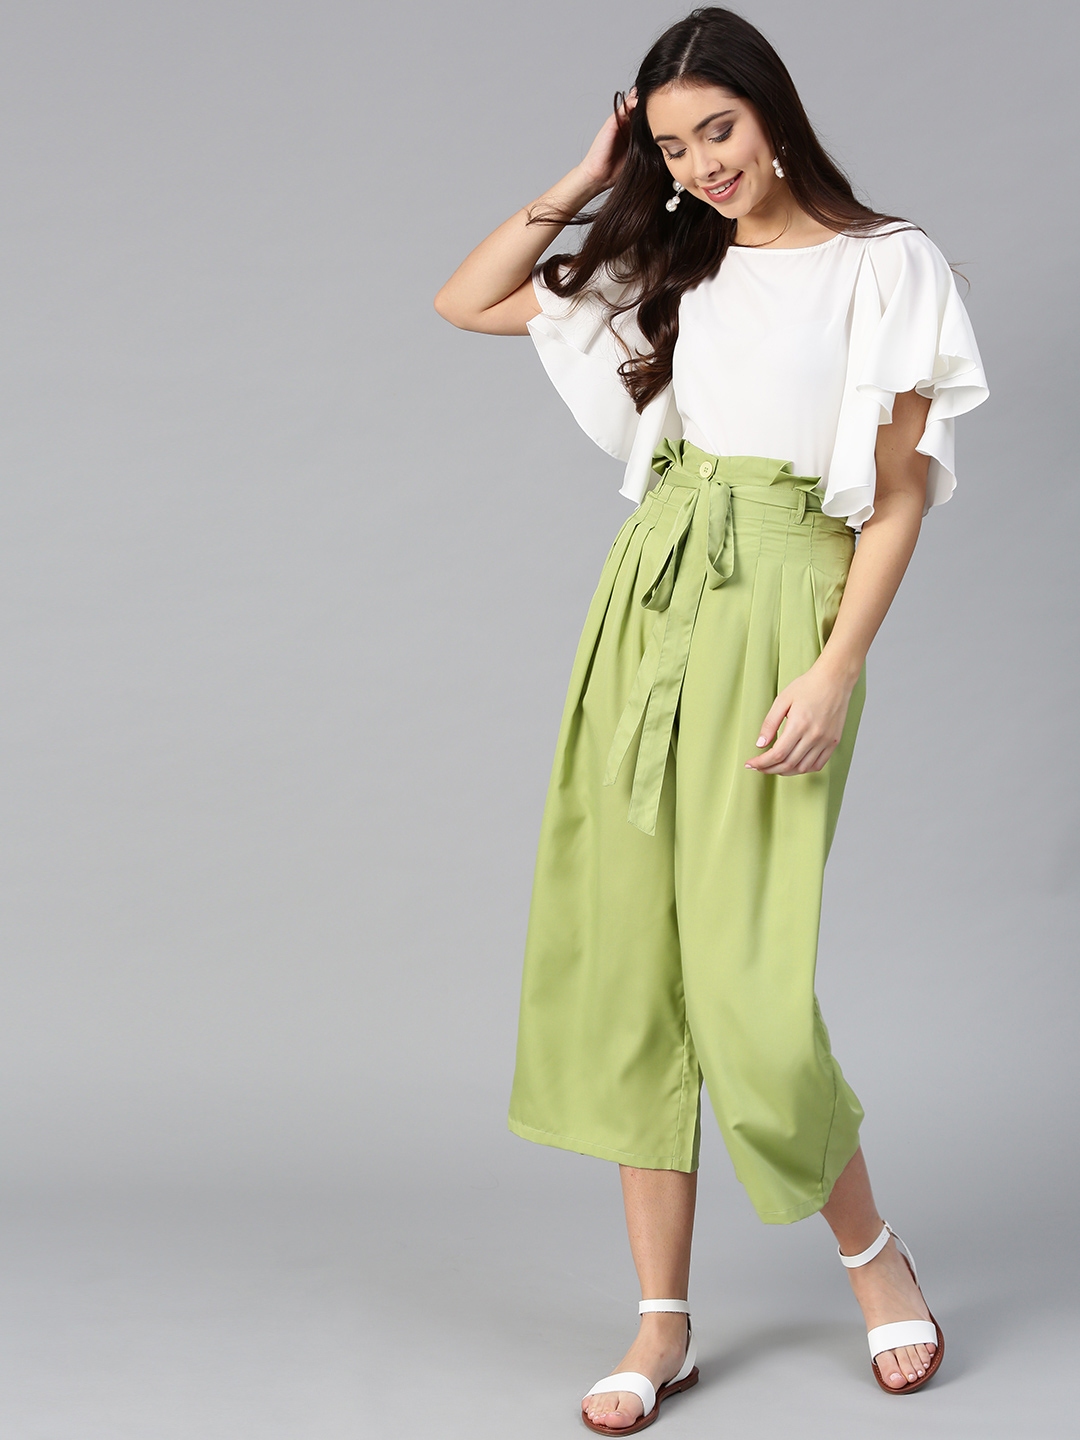 White Floral Puff Sleeve Crop Top  Pant CoOrd Set  Anasua